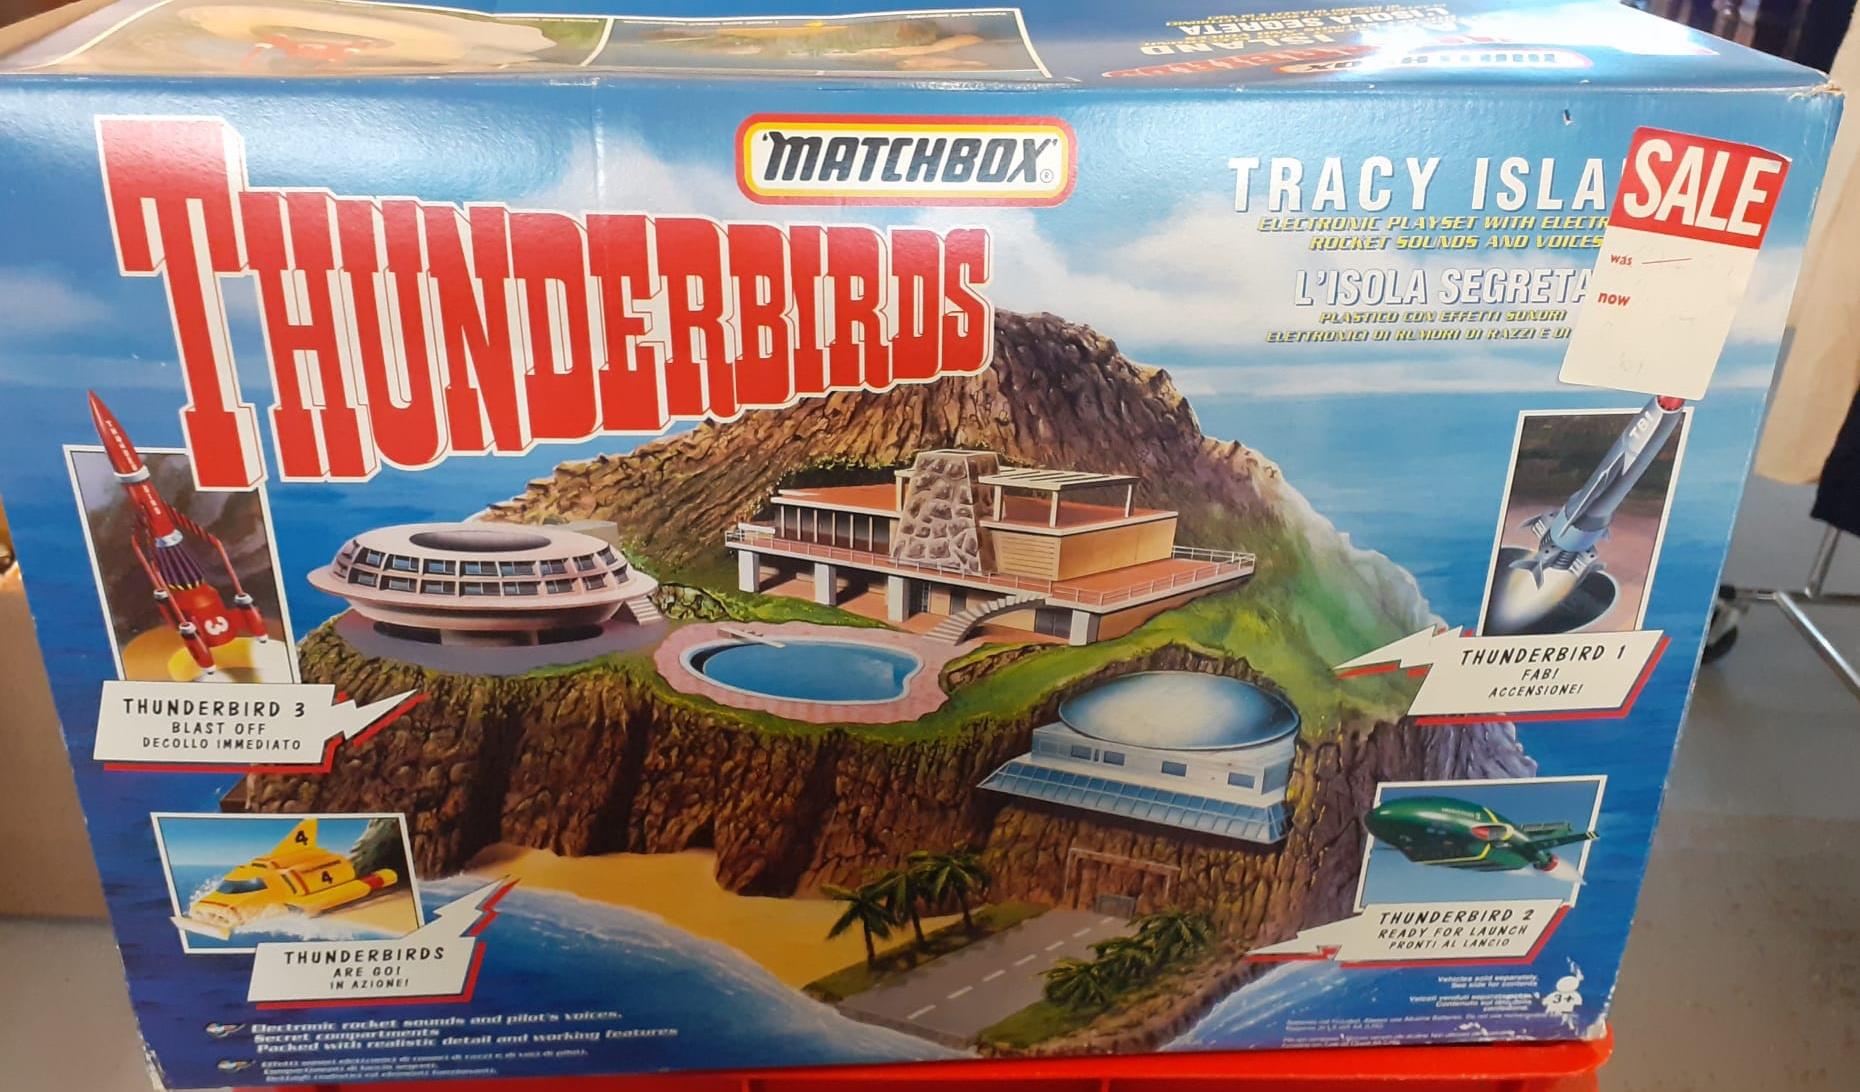 Collection of Matchbox and other Thunderbirds items to include: Tracey Island, various figurines